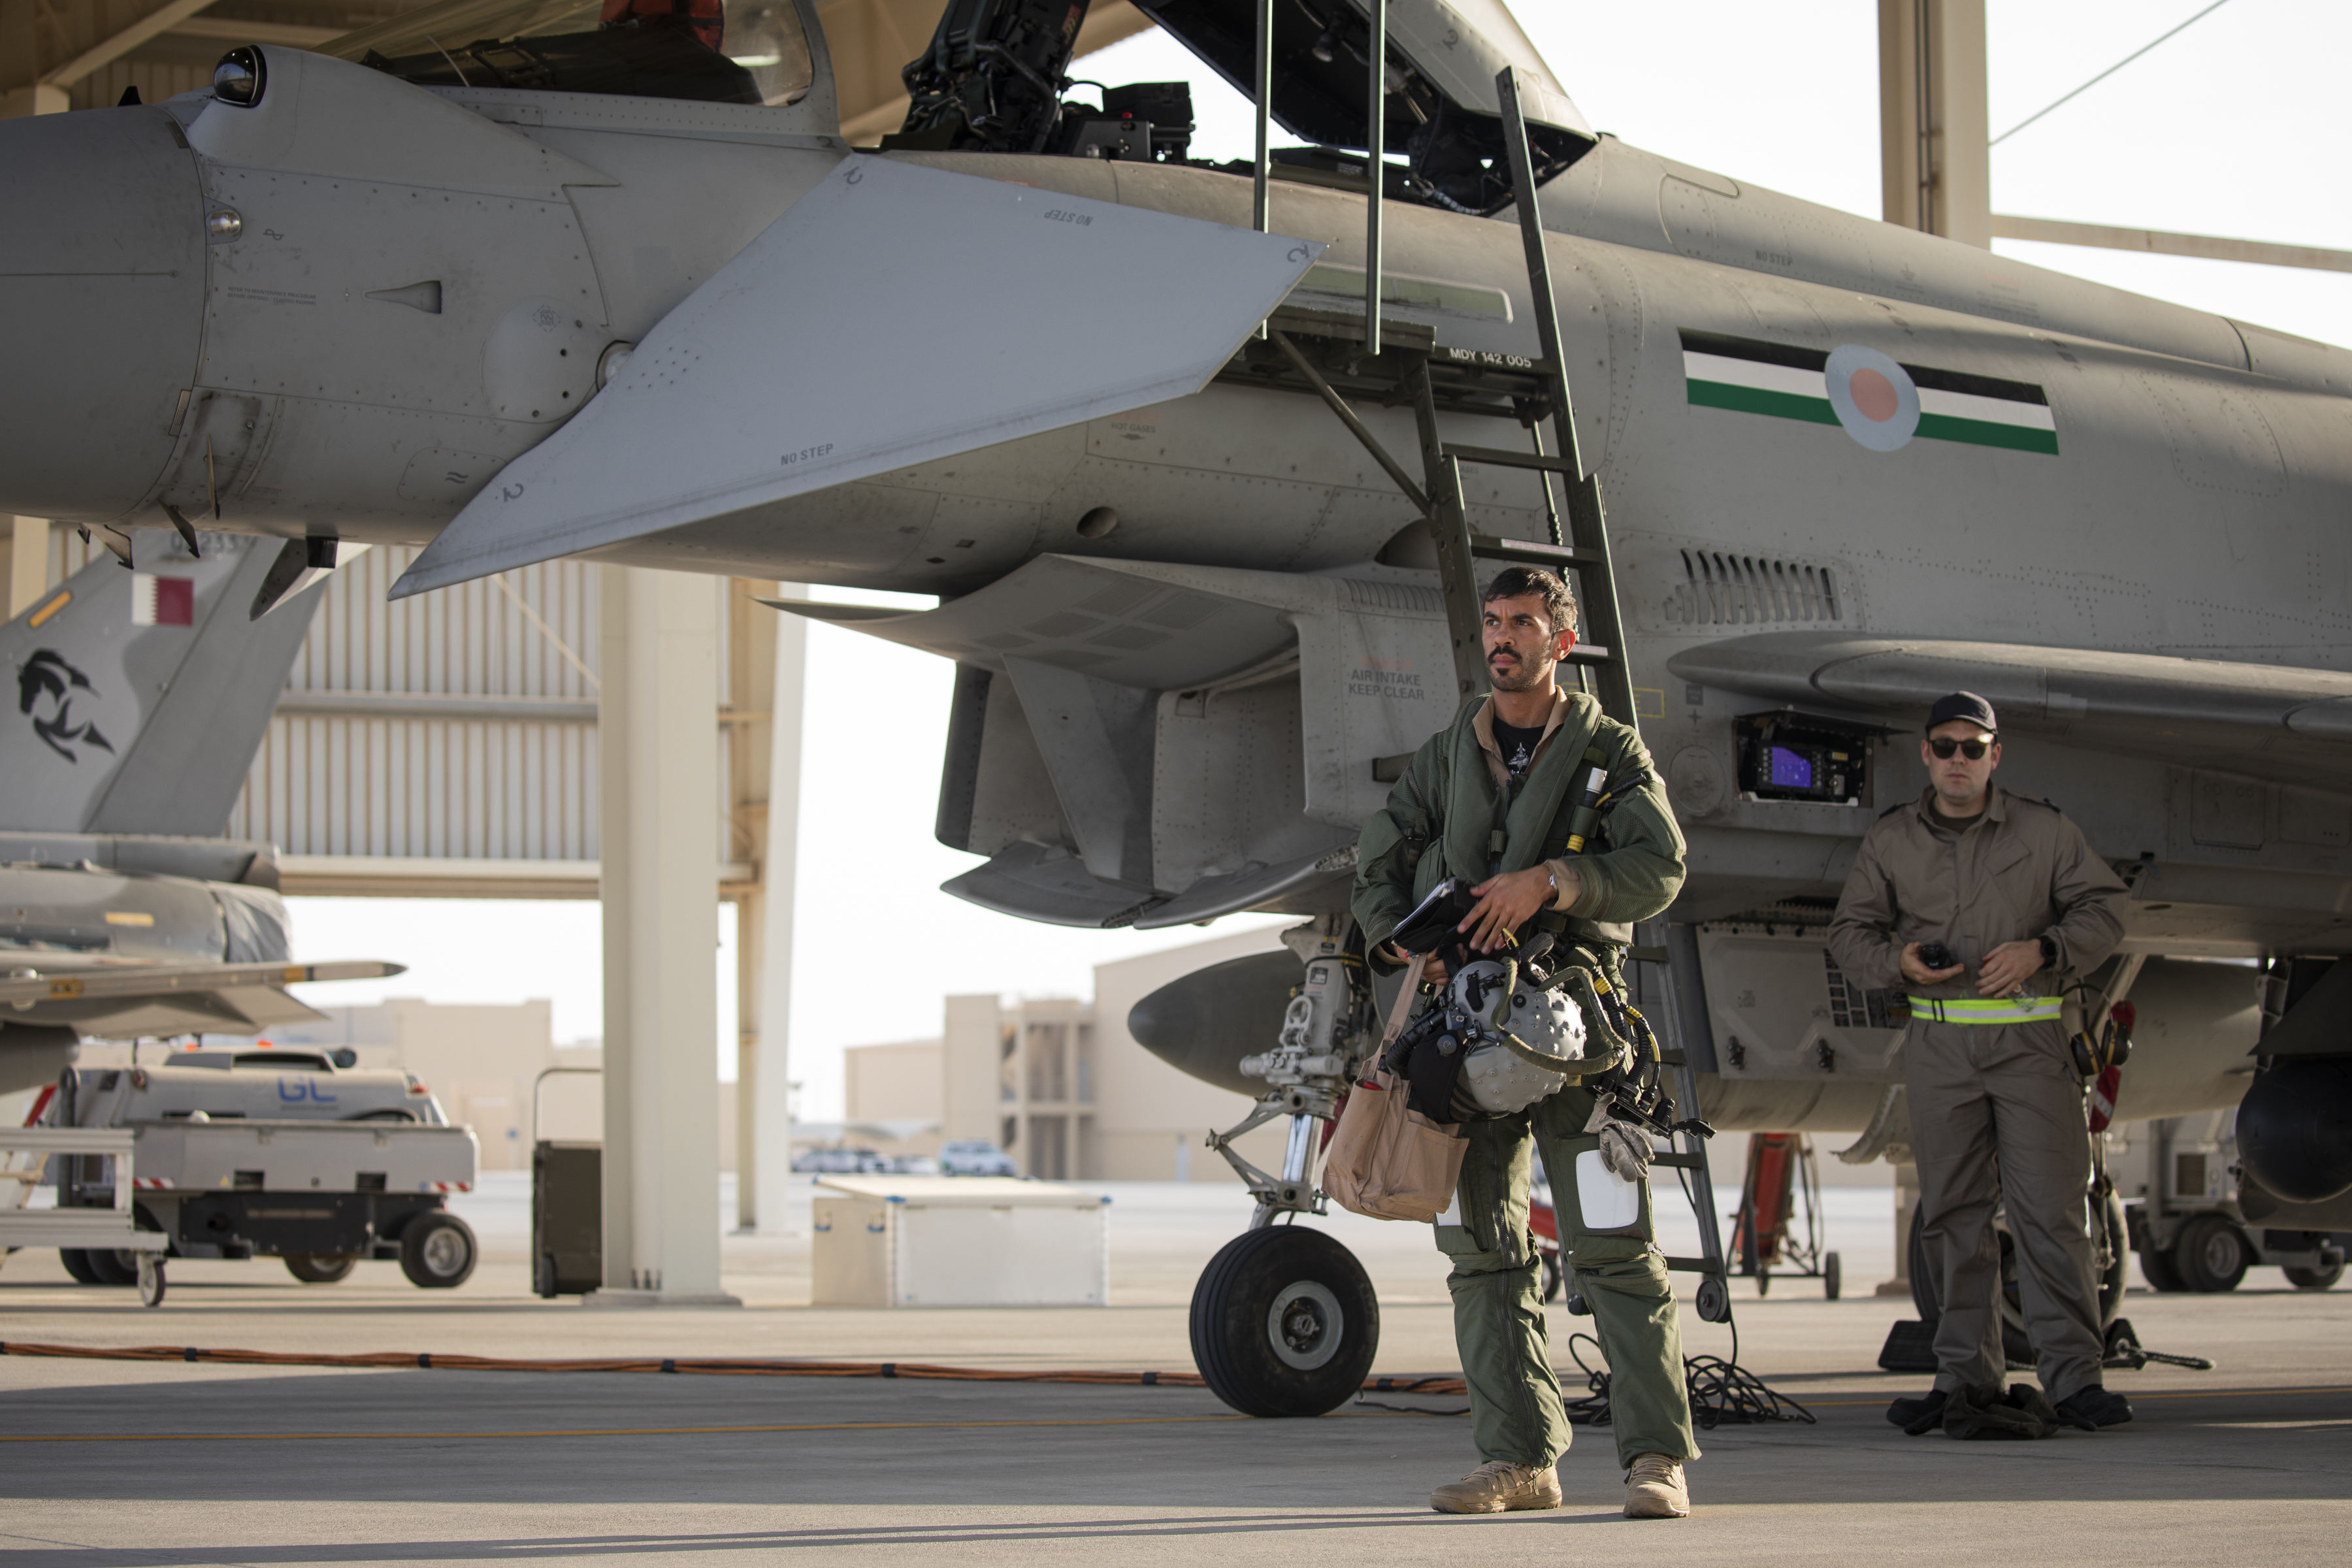 Image shows personnel walking by a Typhoon aircraft on the airfield.